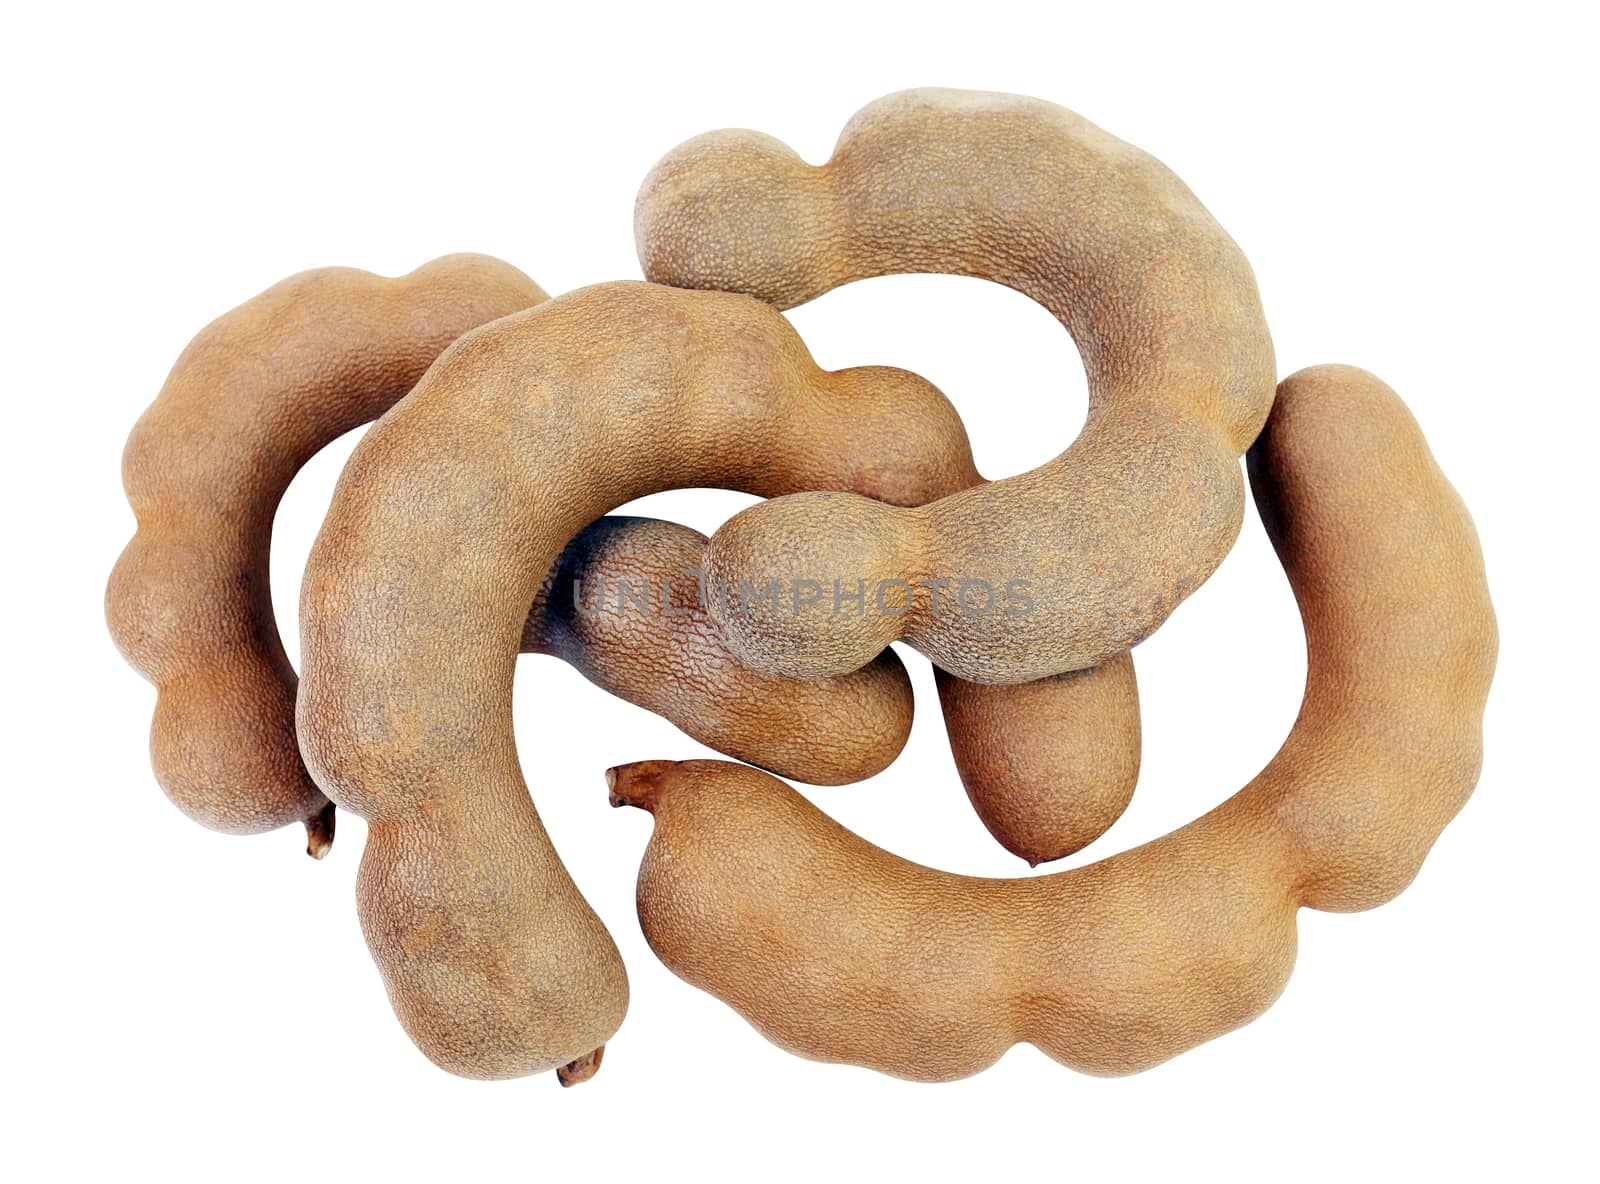 tamarind, sweet tamarind, brown tamarind, tamarind heap isolated on white background by cgdeaw